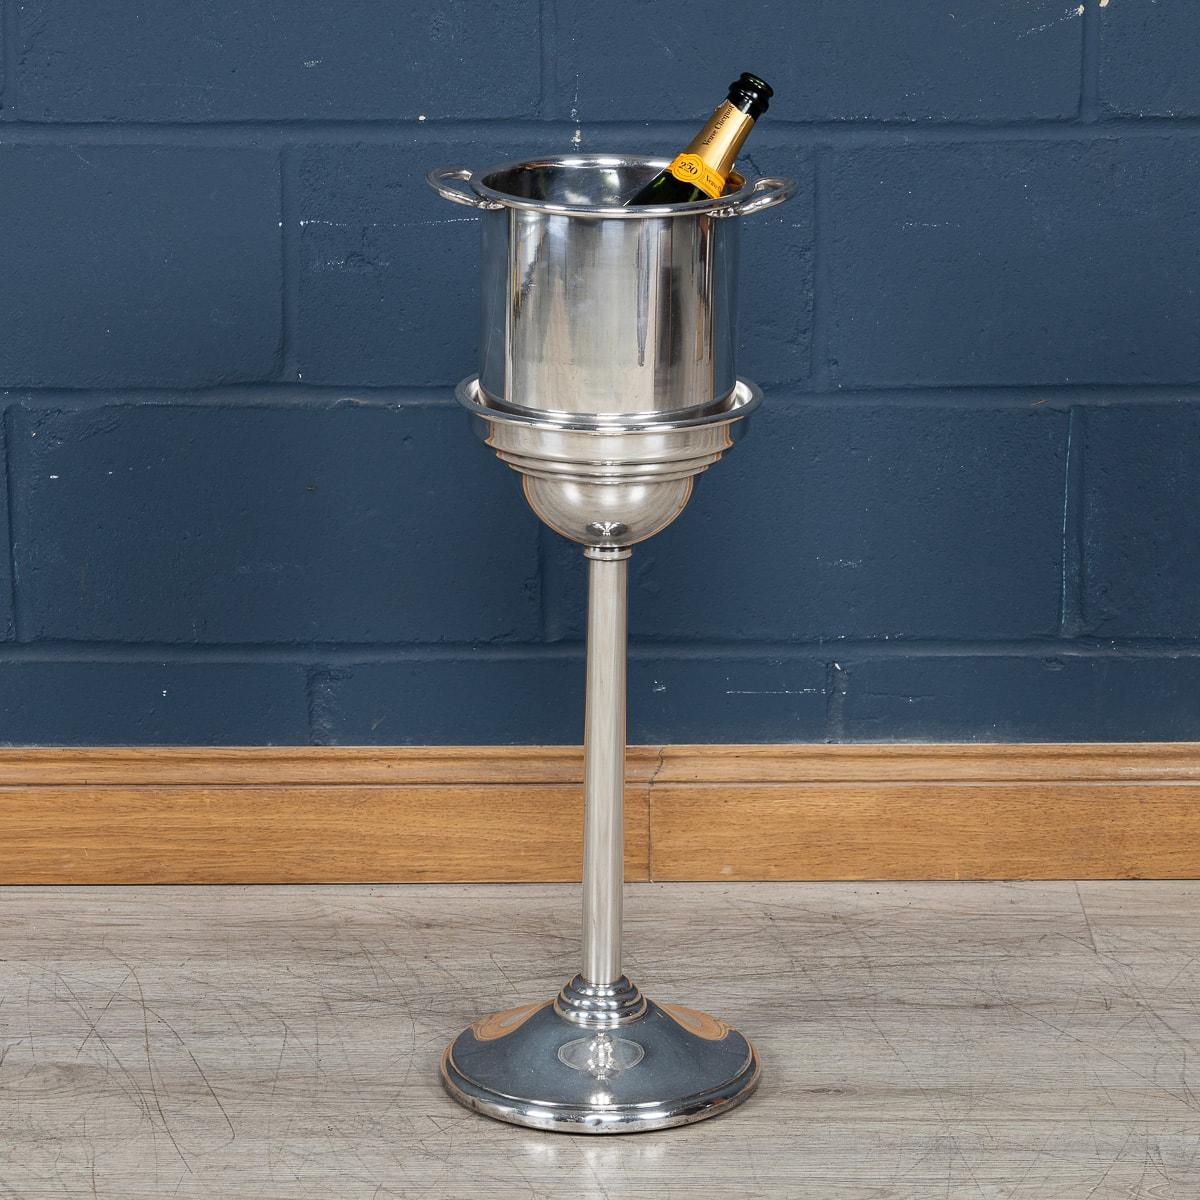 A good quality ice bucket on stand made in the USA in the first half of the last century. The ice bucket is made by a very famous American maker International Silver Co., one of the finest producers of silverplated items and the manufacturer of some